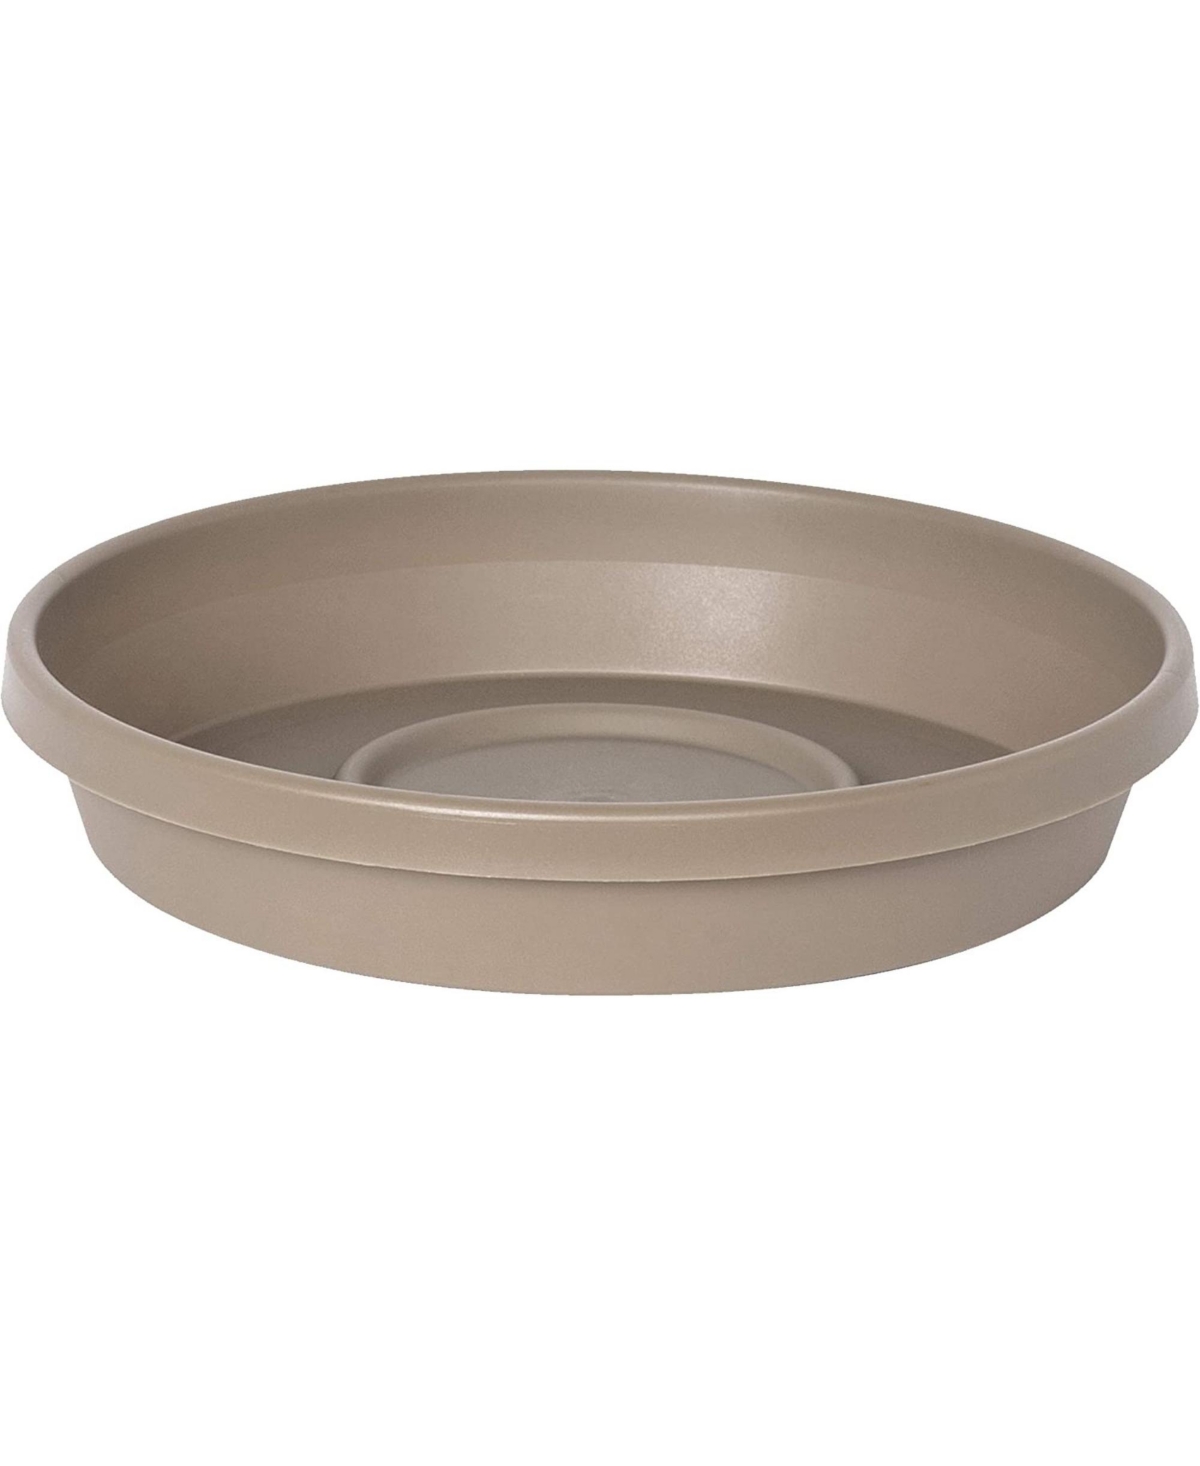 Terra Round Plastic Saucer for Planters, Pebble Stone, 16 inches - Pebble stone